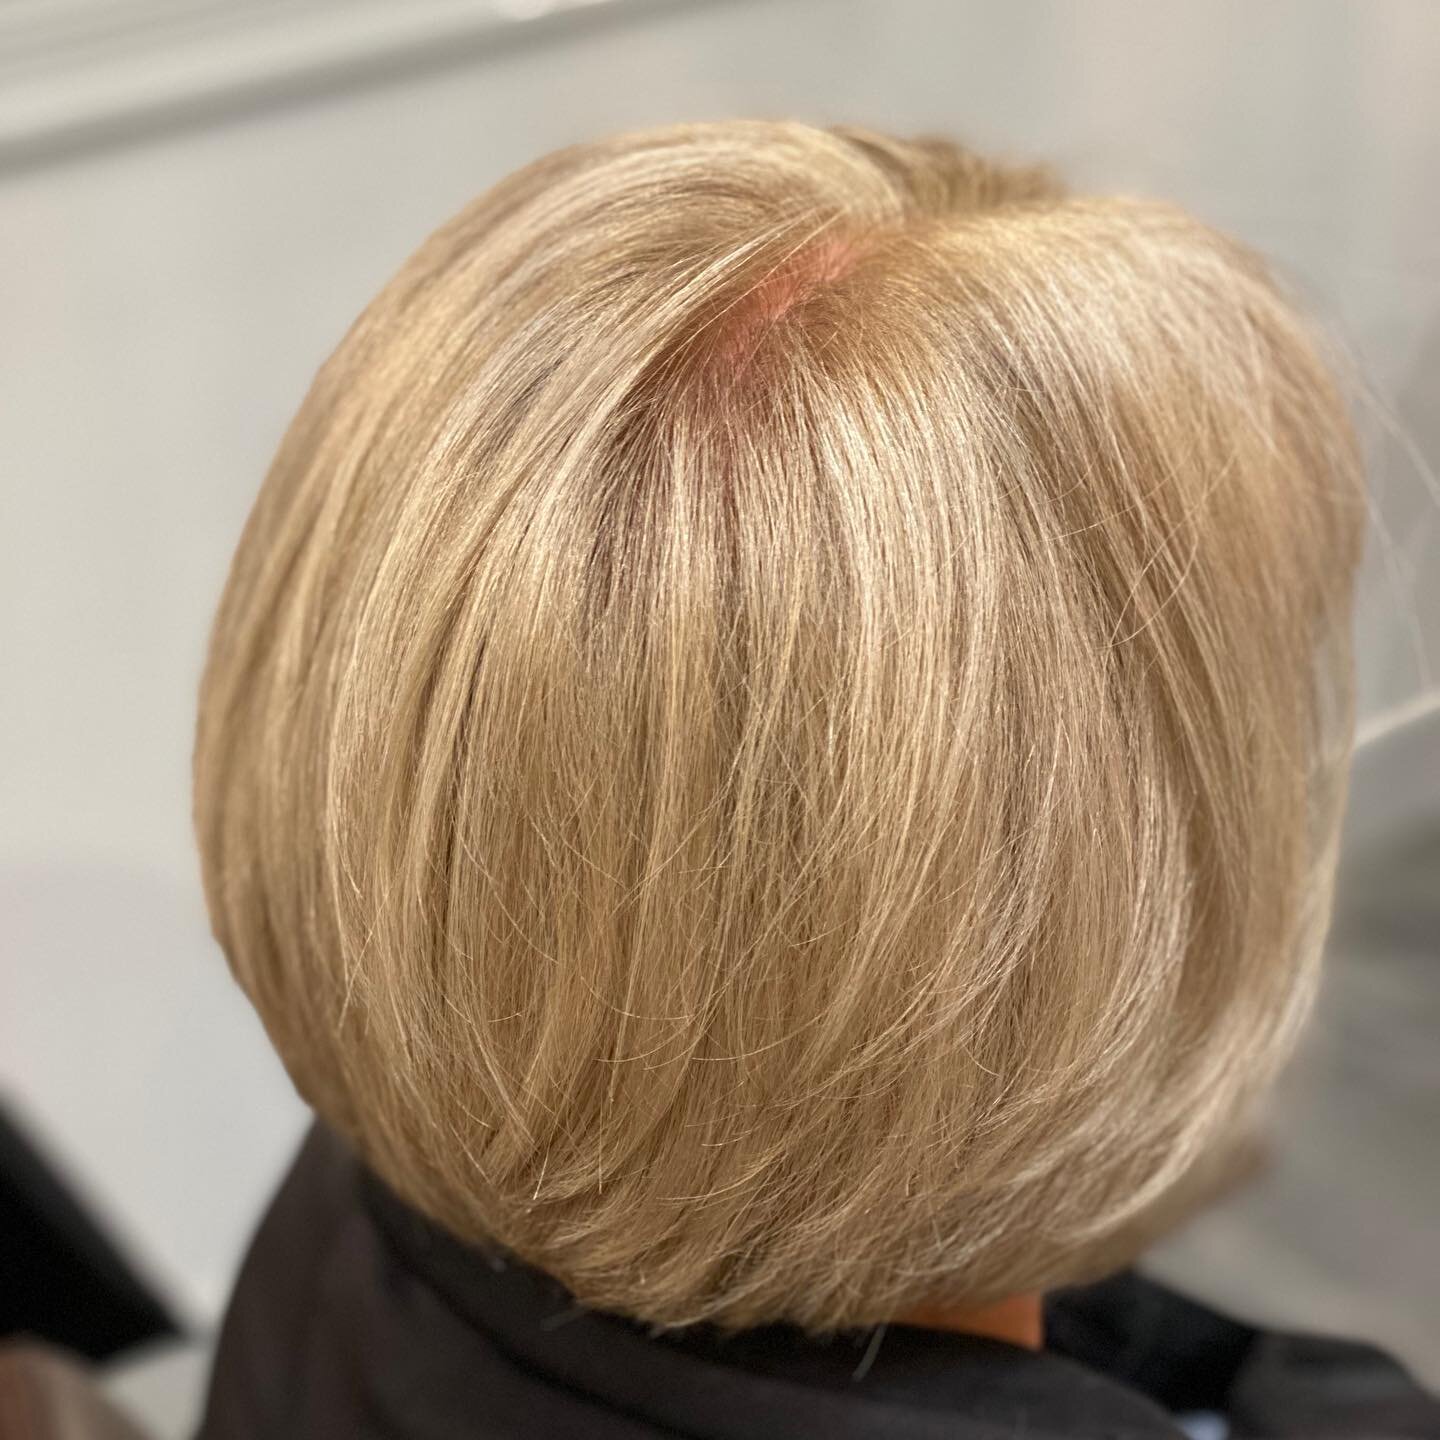 Honey blonde low-lights and a sharp new haircut had this client doing the happy dance on her way out the door! #ilovemywork #backtowork #behindthechair #stylistofinstagram #greatereasthamptonchamberofcommerce #keystonemillworks #boylestonroom #milksh